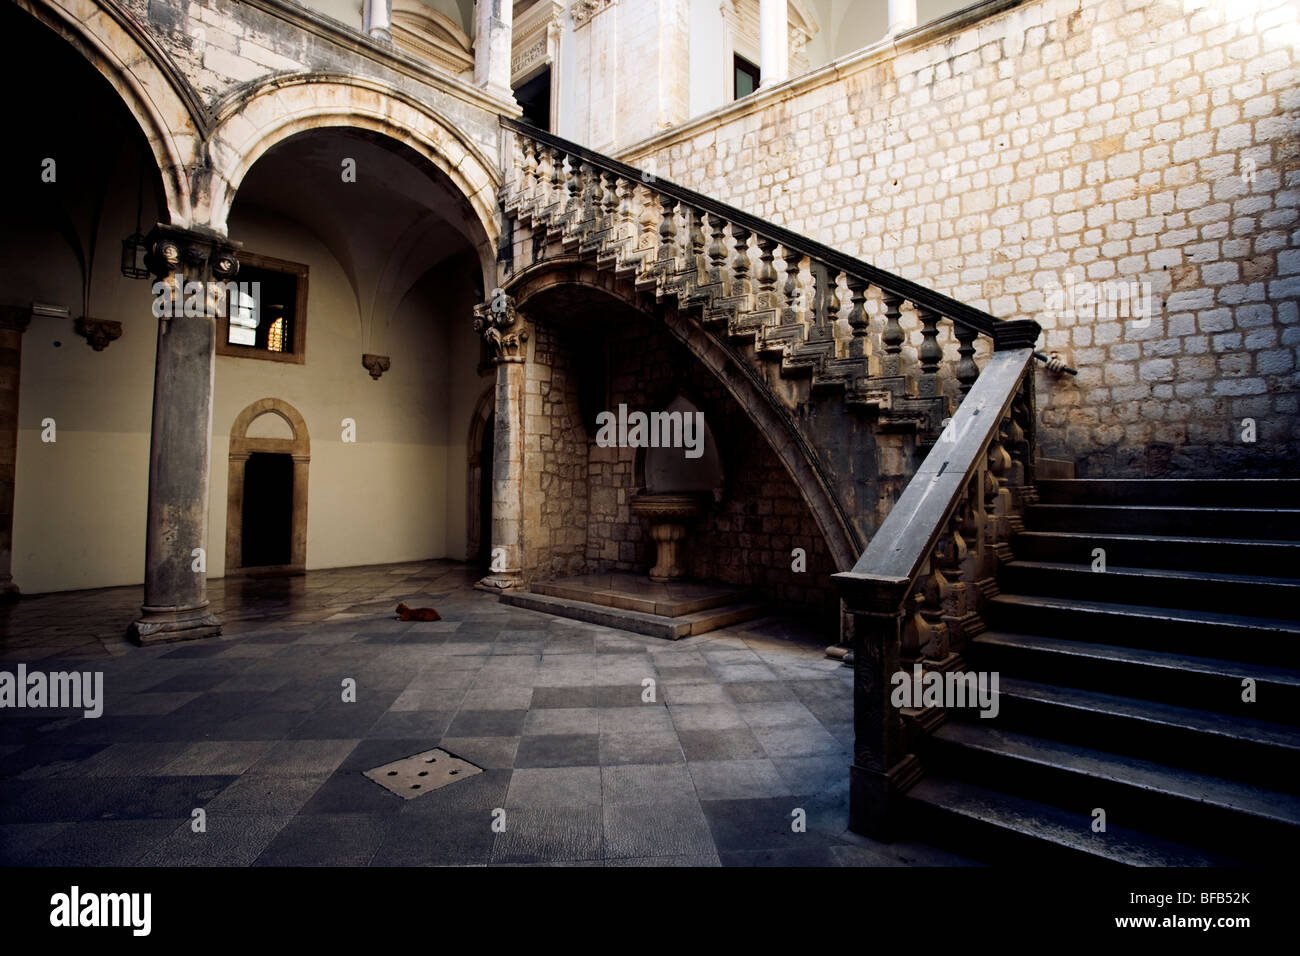 Inside Rector's Palace, Dubrovnik old town, Croatia Stock Photo